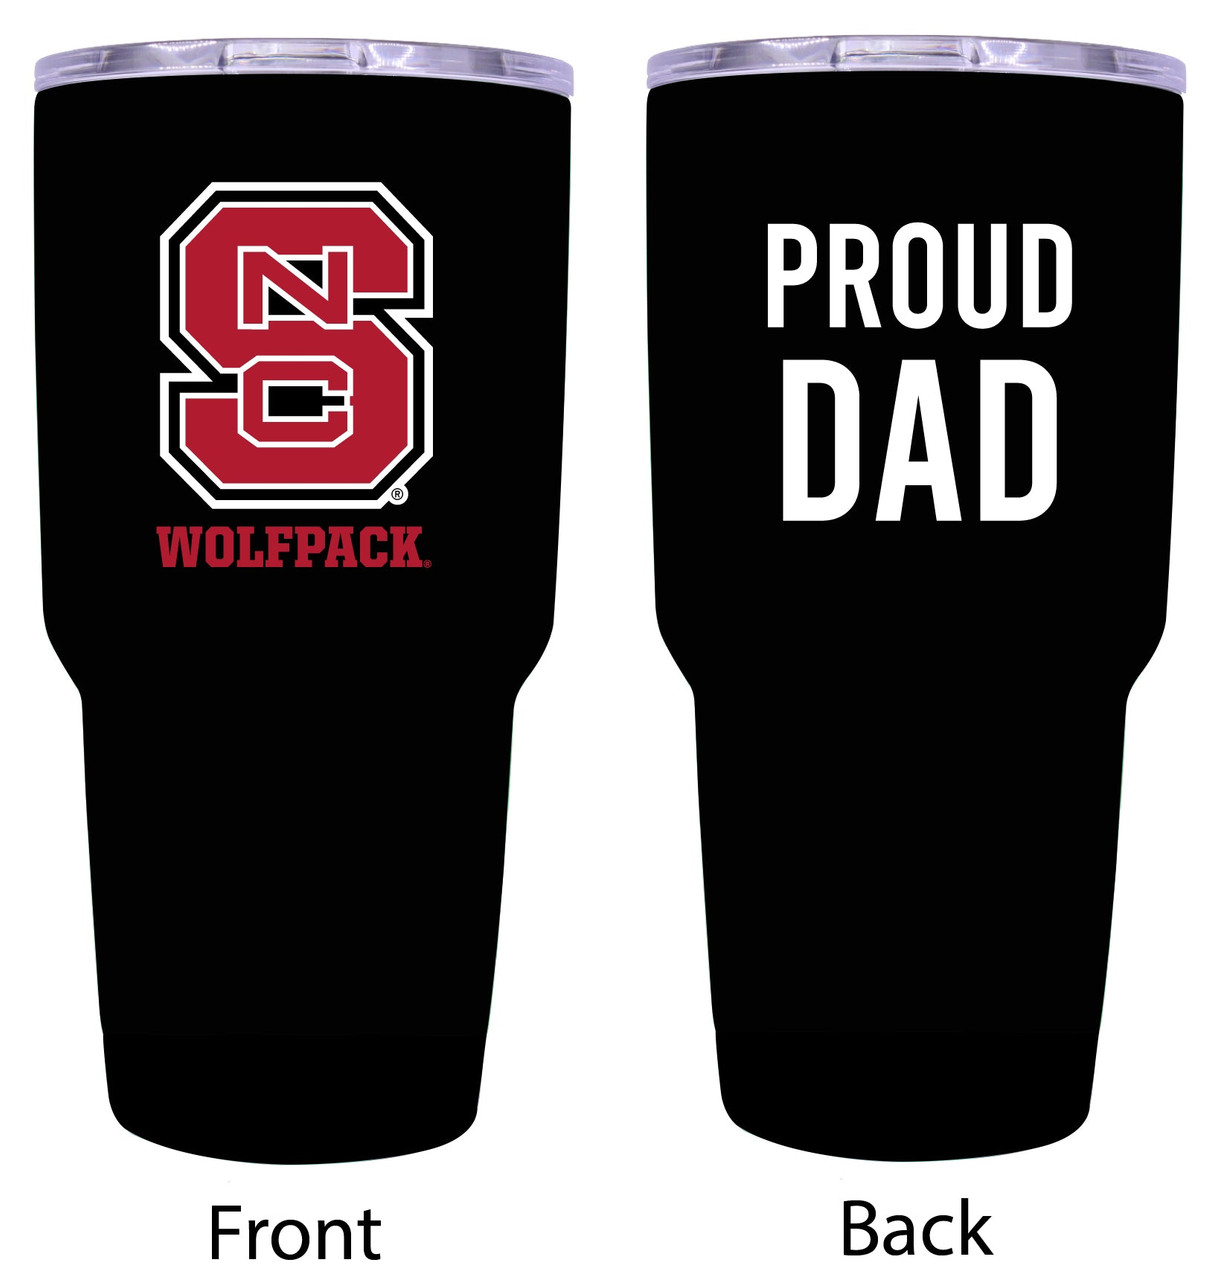 NC State Wolfpack Proud Dad 24 oz Insulated Stainless Steel Tumblers Black.